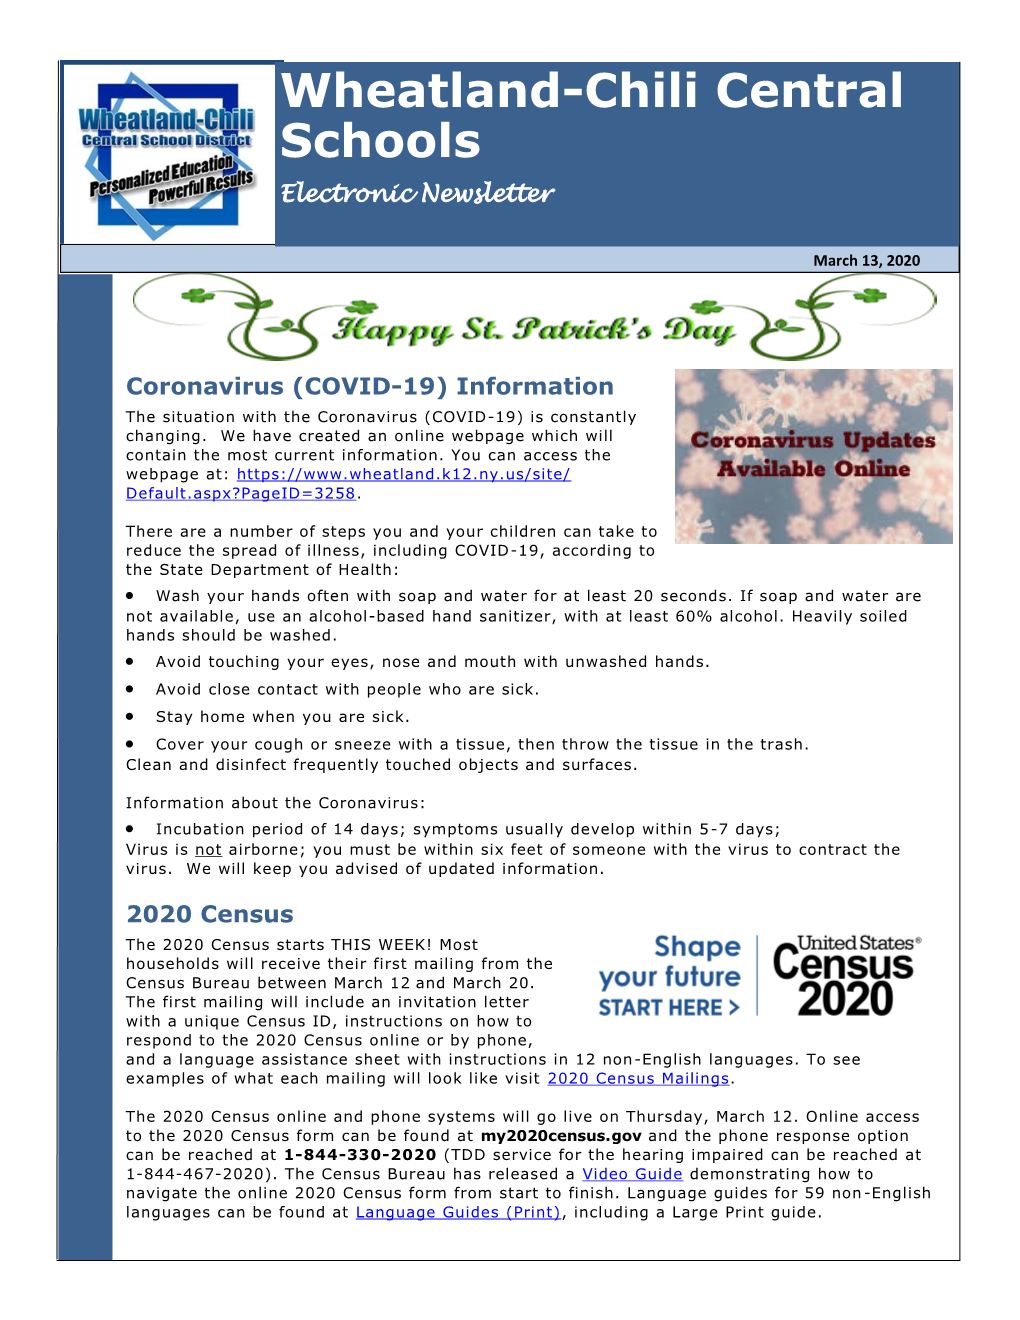 Wheatland-Chili Central Schools Electronic Newsletter